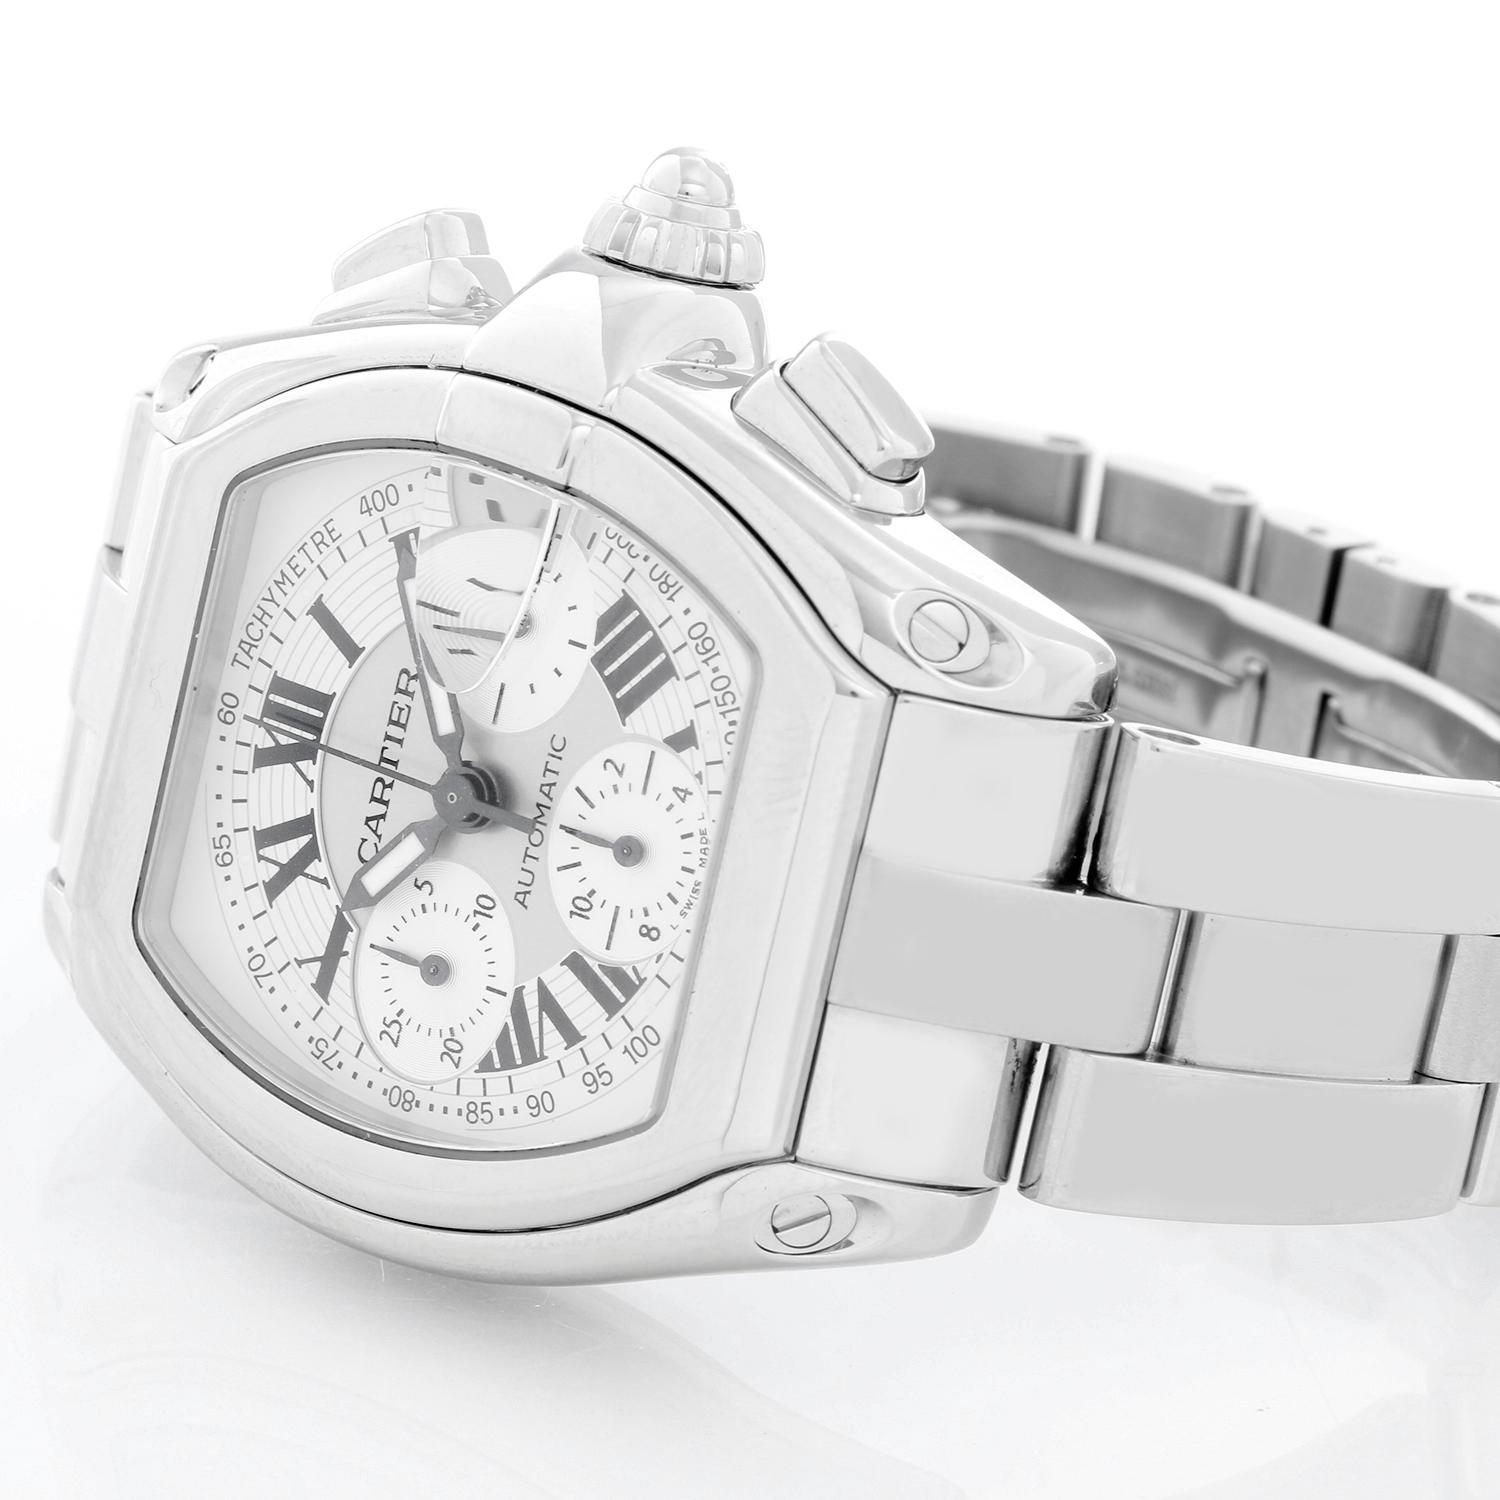 Cartier Roadster Chronograph Stainless Steel Men's Watch - Automatic winding chronograph with date. Stainless steel case (43mm x 48mm). Silver dial with white Roman numerals; date at 3 o'clock. Stainless steel Cartier bracelet with deployant clasp.